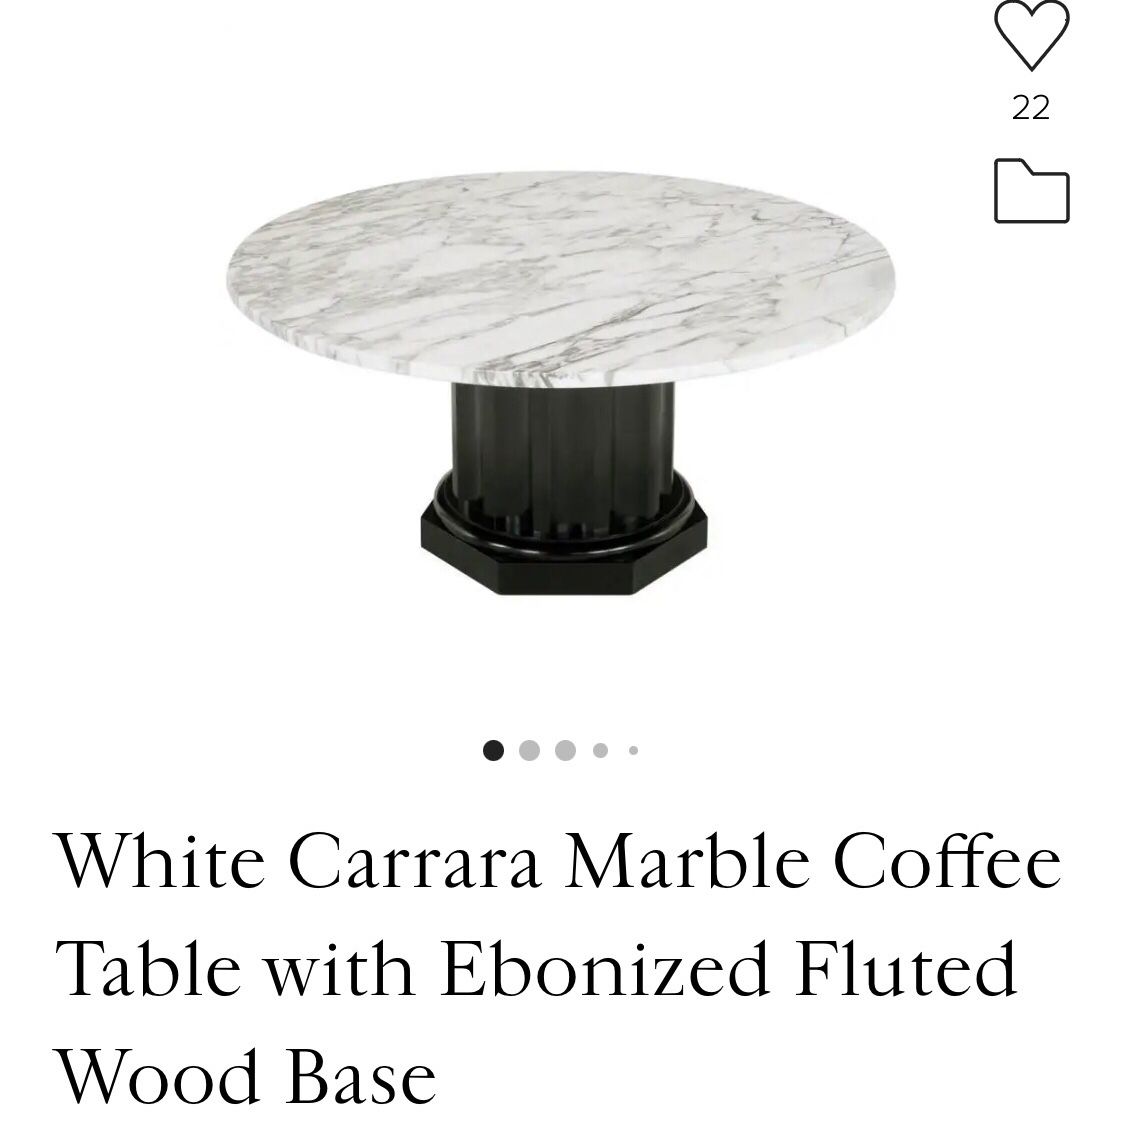 White Carra Marble Coffee Table